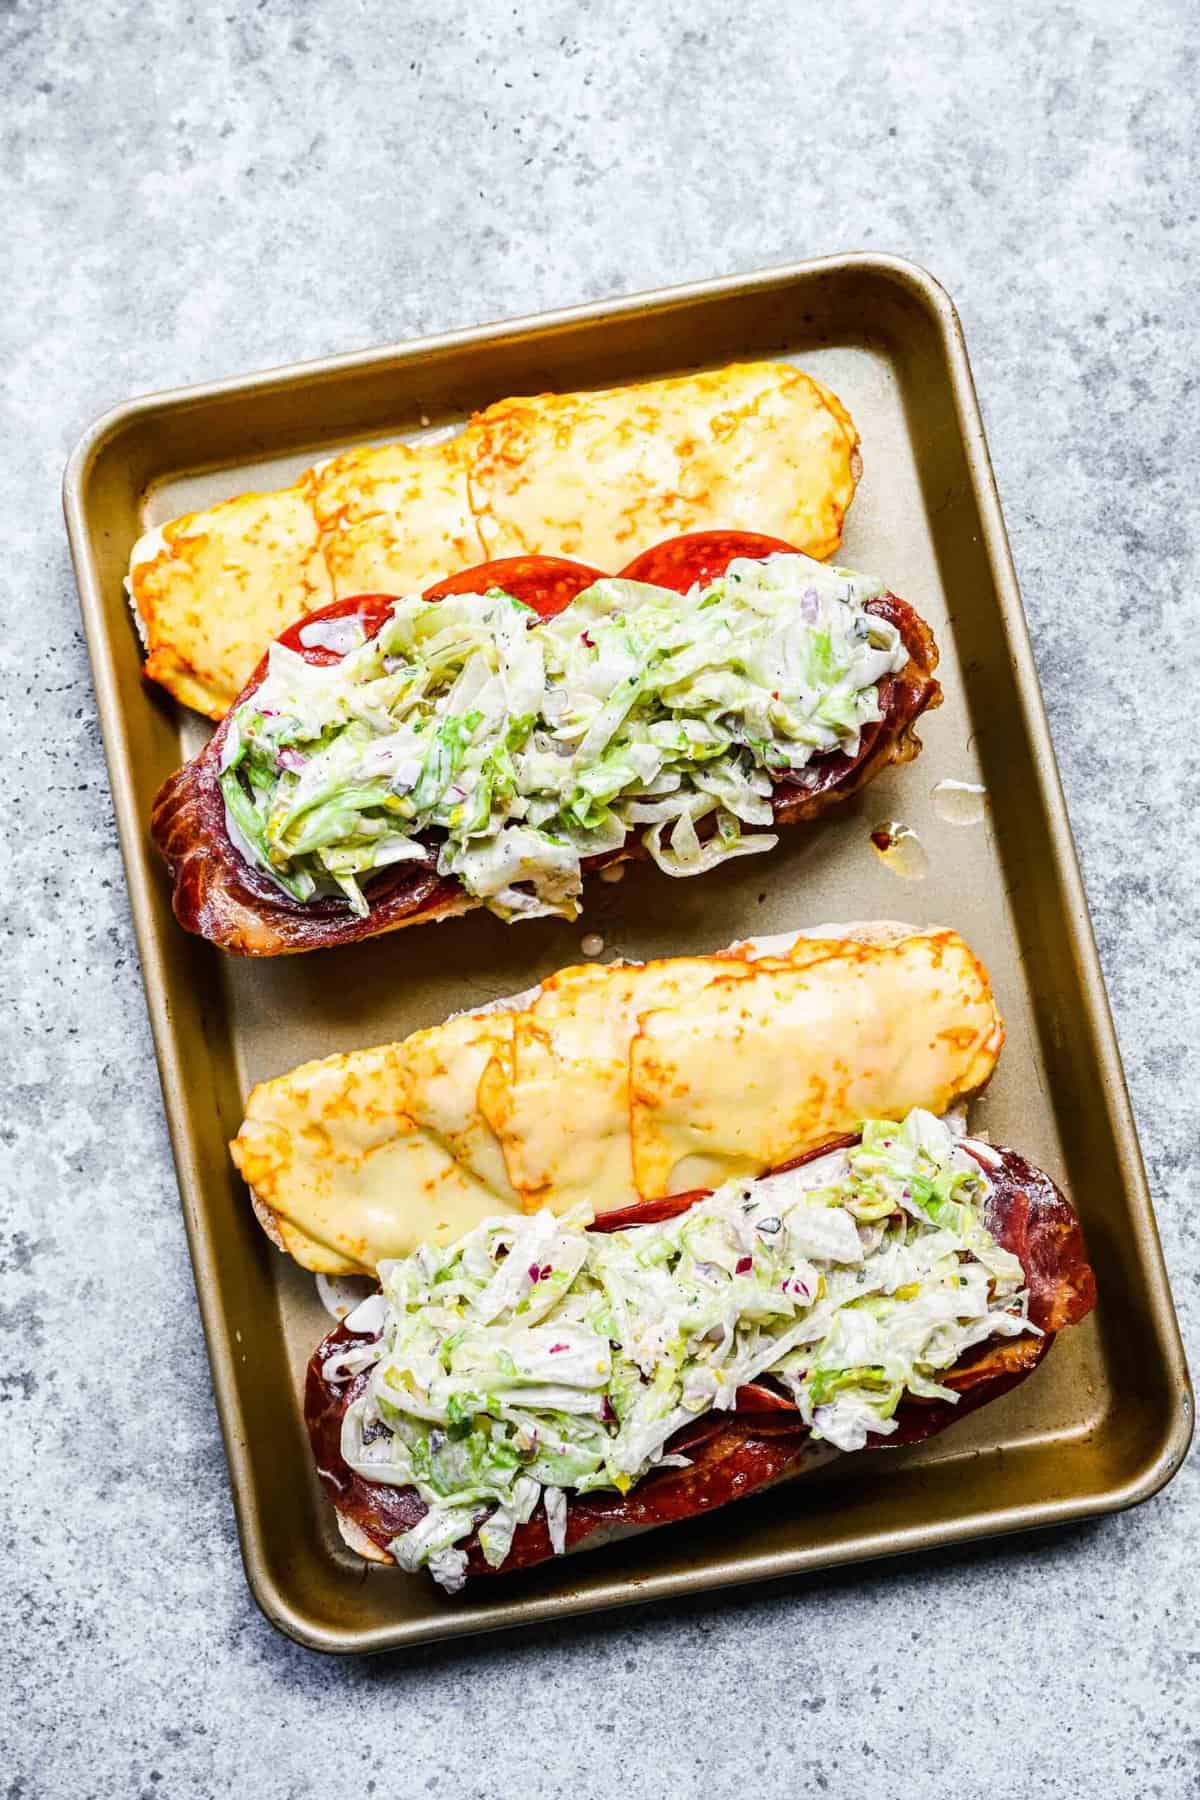 Two hoagie rolls on a baking sheet, with melted cheese on one half, and cured meats topped with a salad on the other half